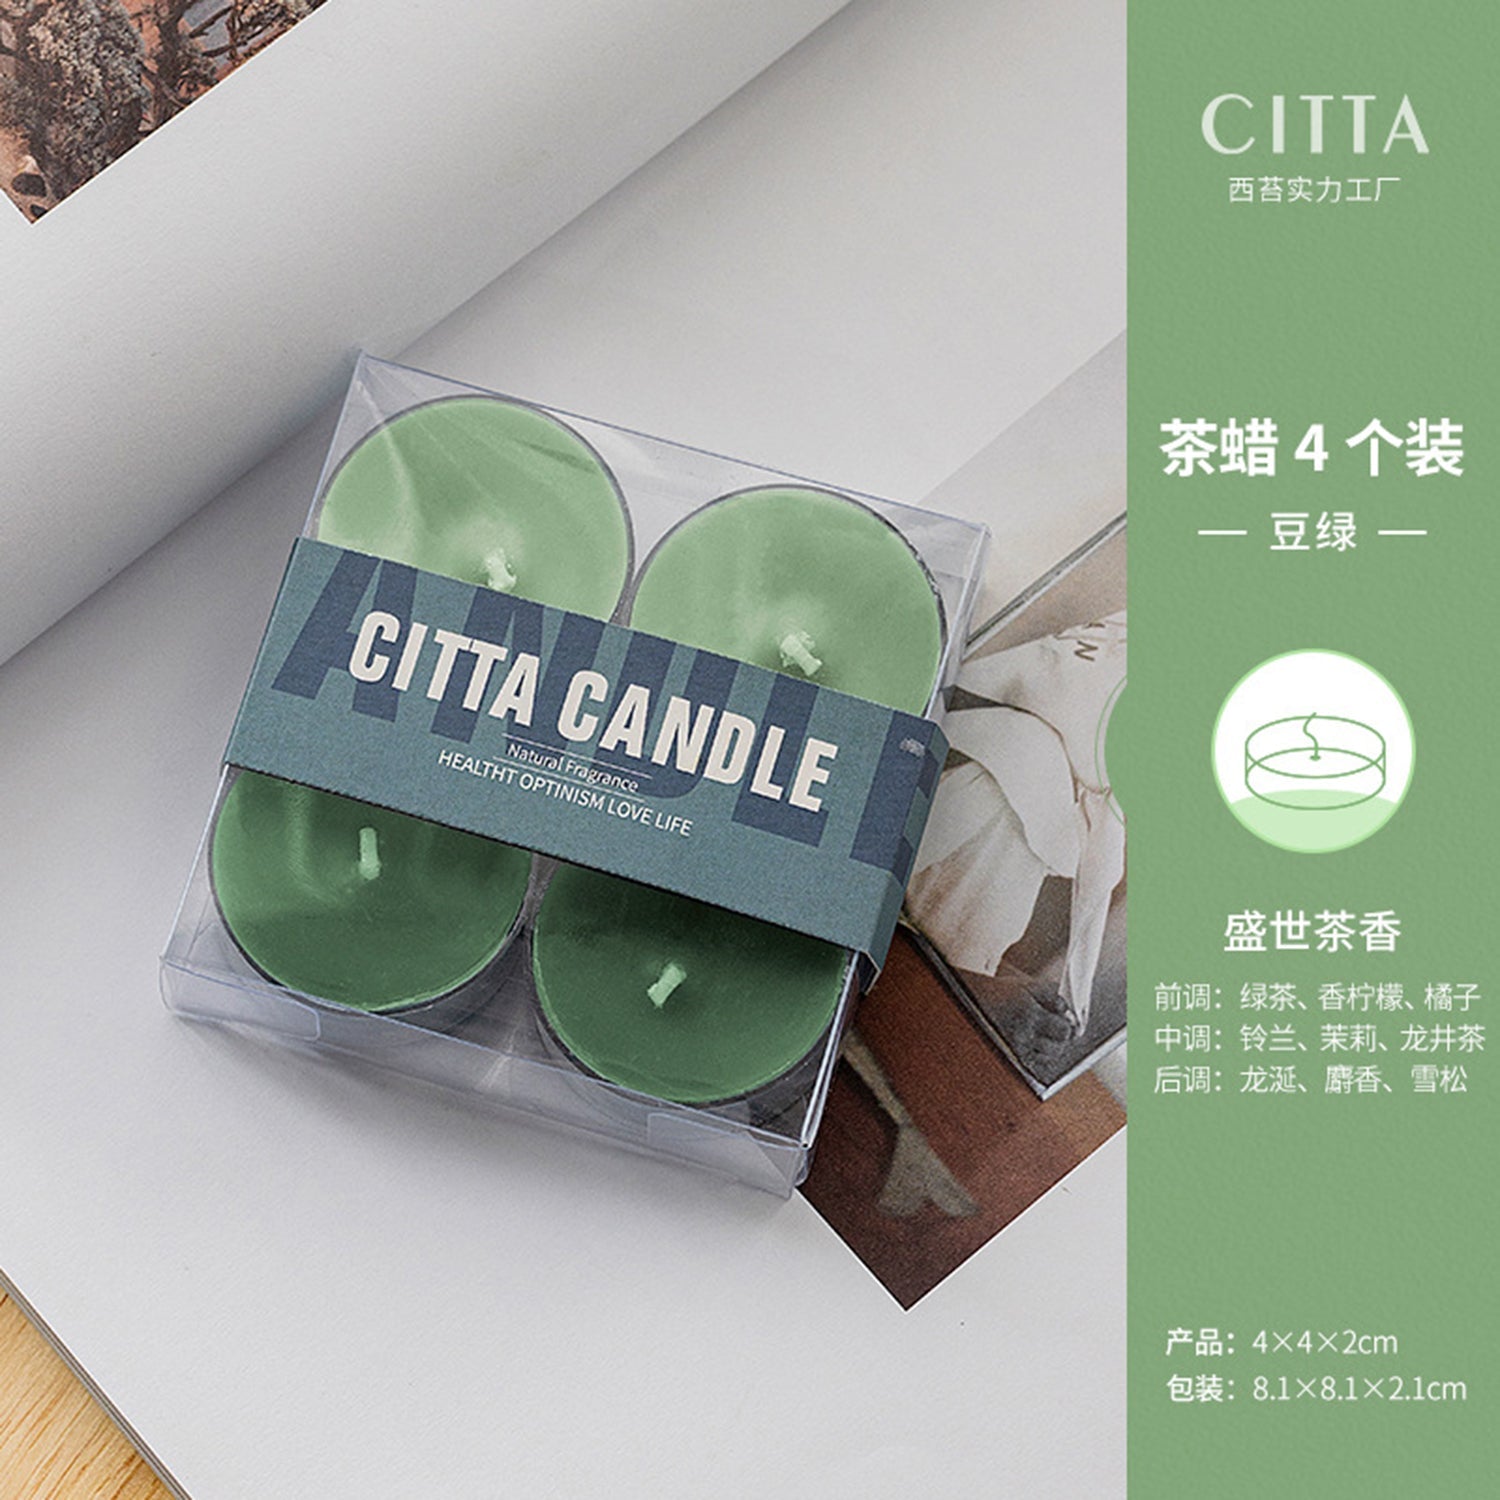 CITTA Elegant Series Scented Candle Aromantic Natural Soy Wax 15G Home Fragrance Aromatherapy (Pack Of 4) Scented Candle CITTA Tea in Bloom 